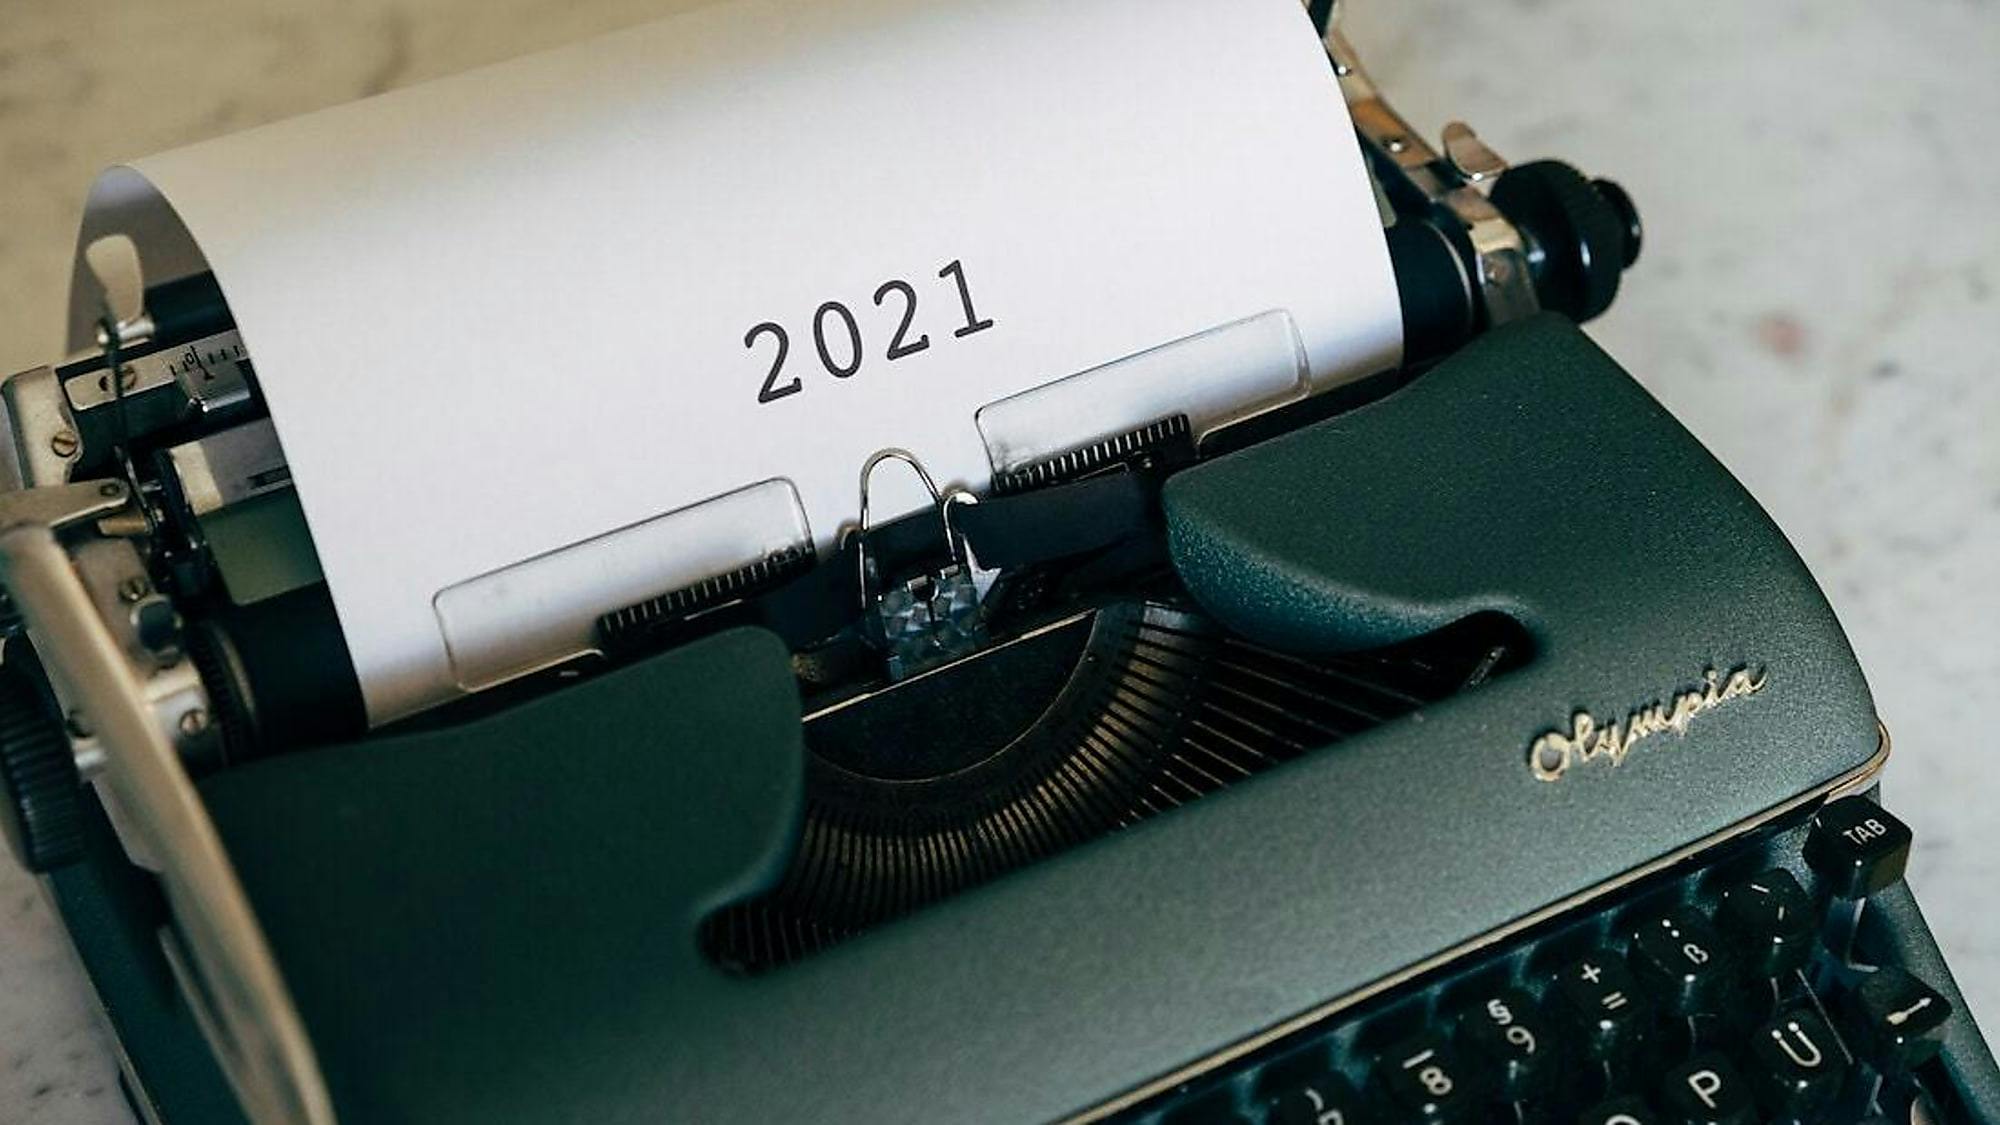 2021 reflections journal: A year of learnings and decisions